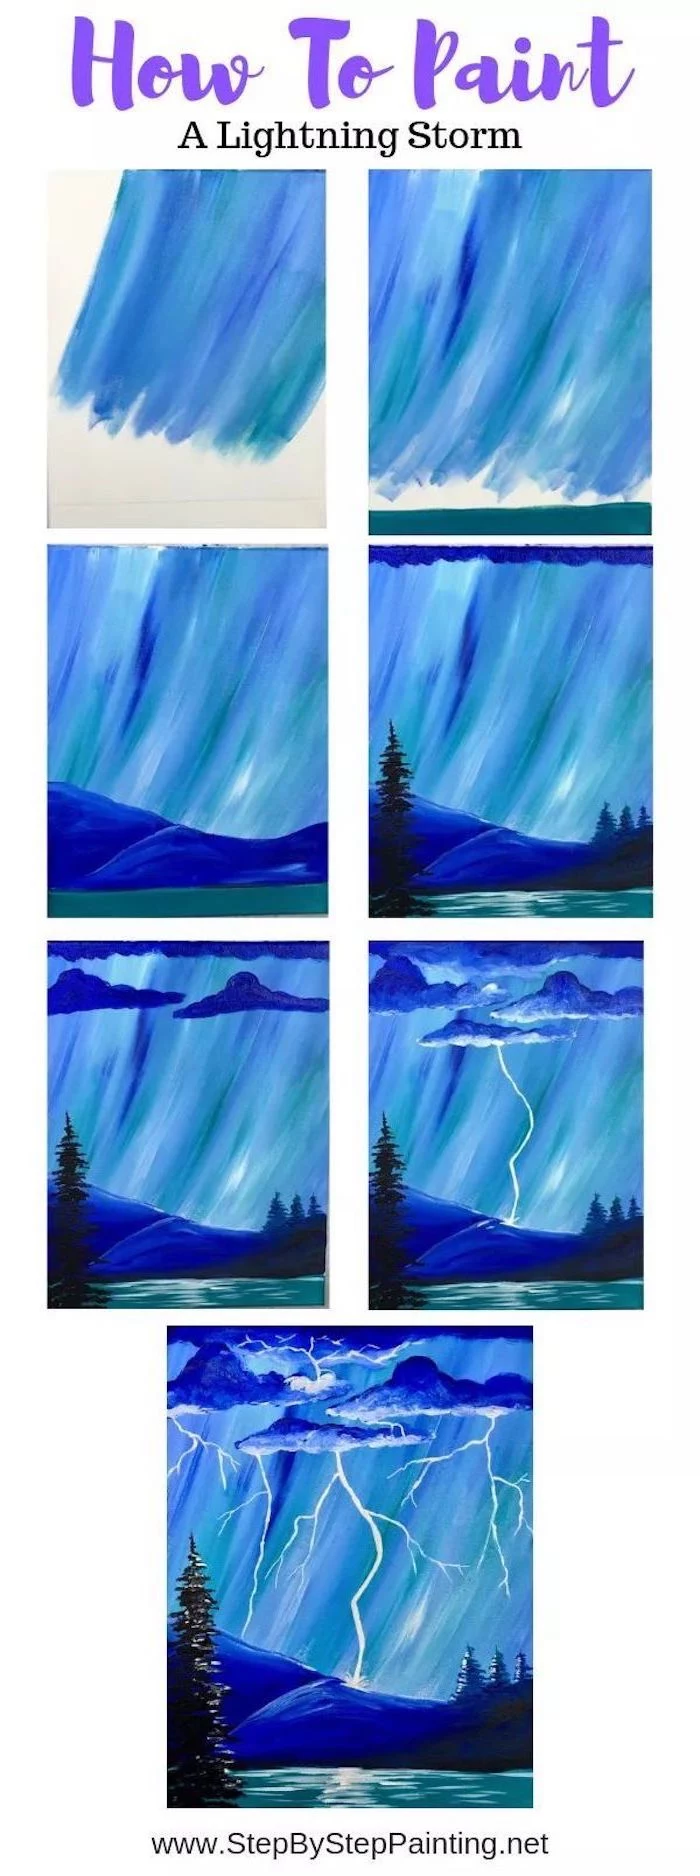 acrylic painting techniques, how to paint a lightning storm, photo collage of step by step diy tutorial, step by step acrylic painting tutorial